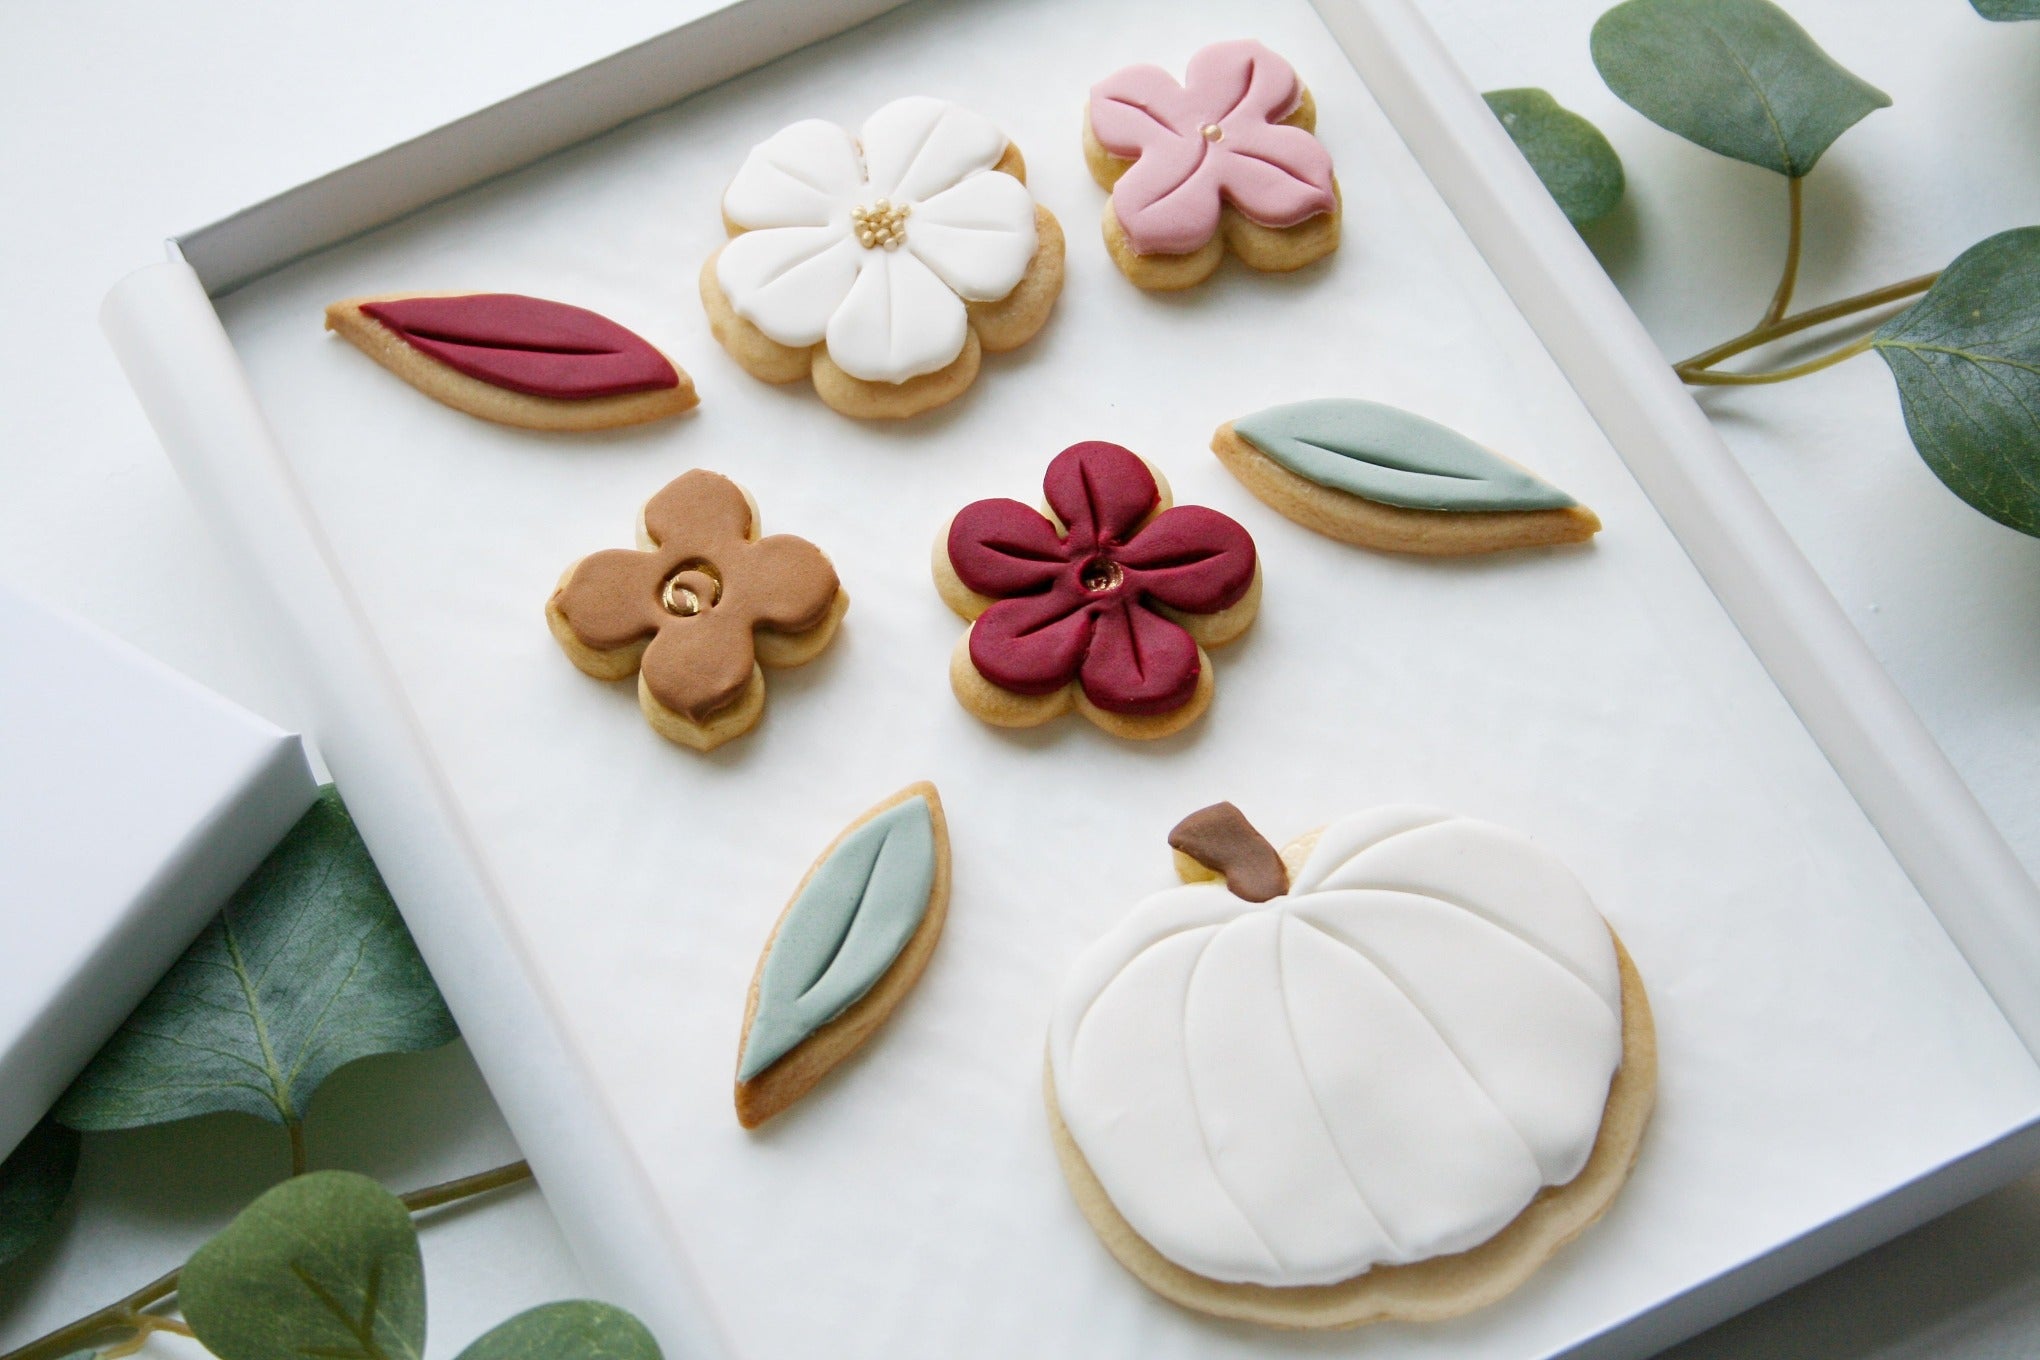 Autumn Flowers Gift Box, Autumn Cookies in the shape of flowers, Iced Pumpkin and flower selection